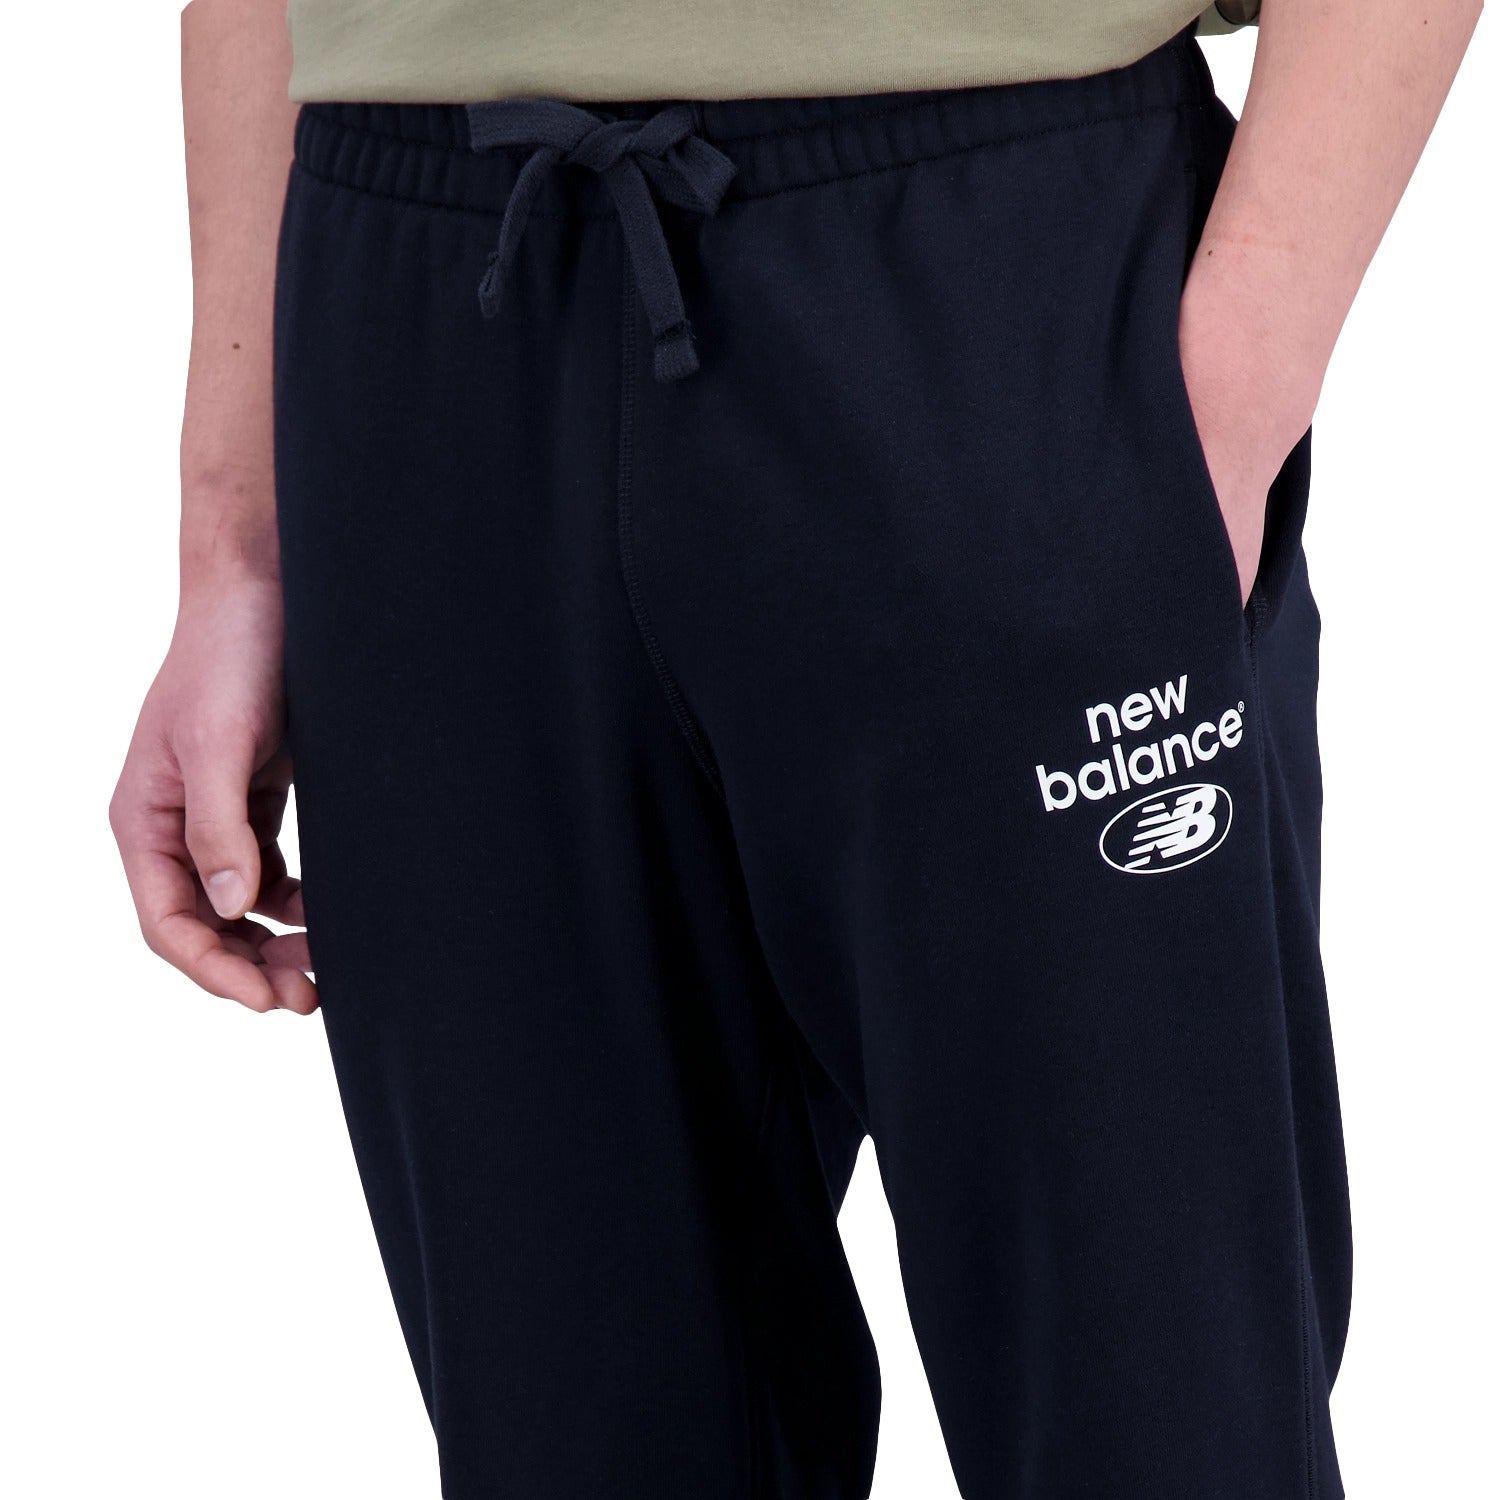 New Balance Men Essentials Reimagined French Terry Sweatpant Black MP31515-BLK - BOTTOMS - Canada